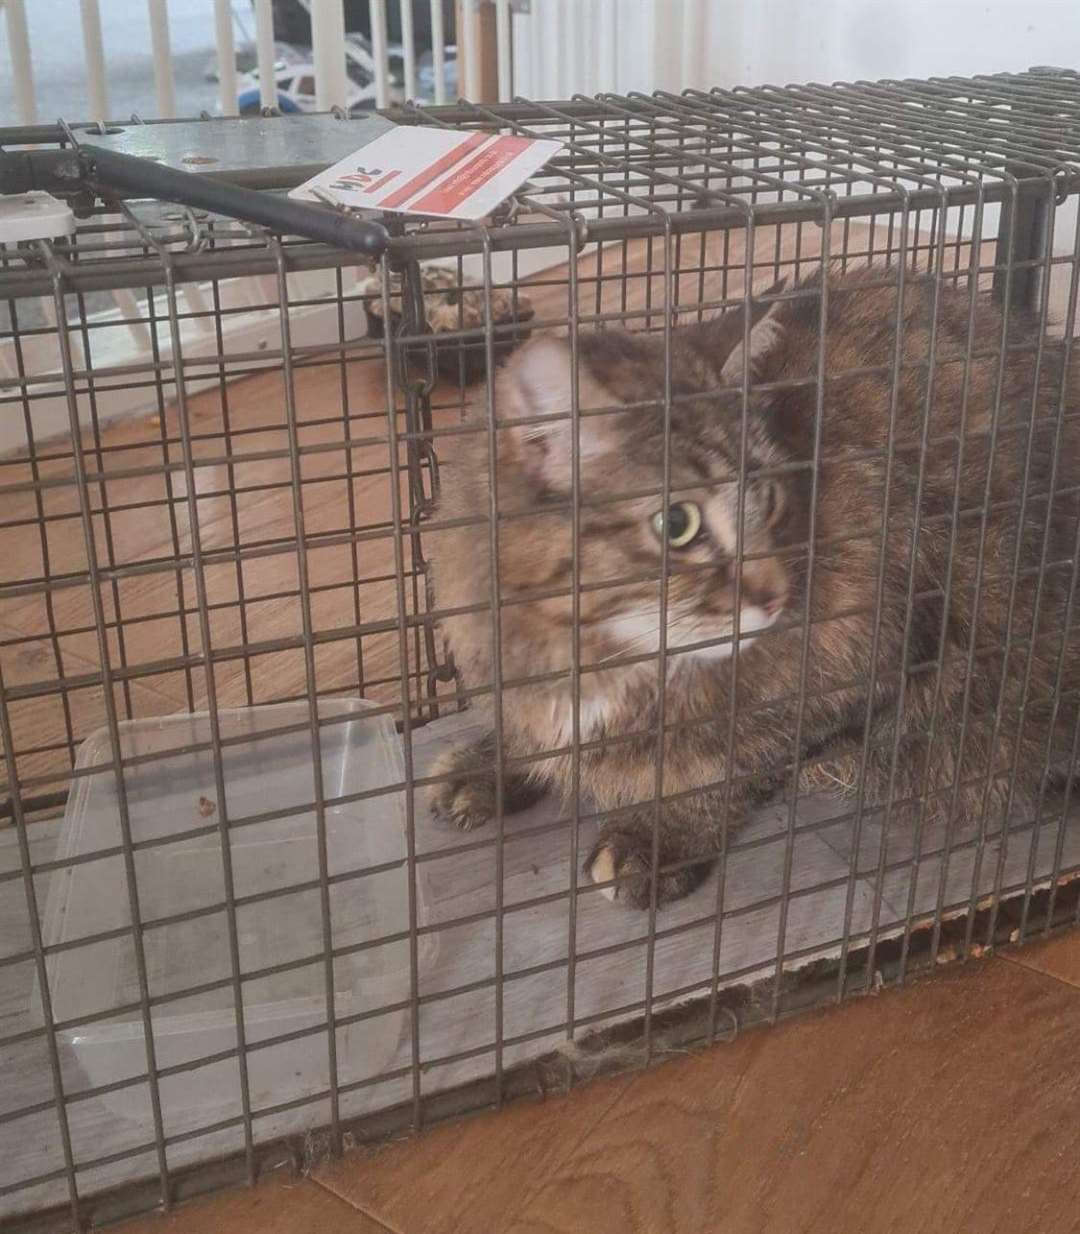 Honey was caught in a cage and brought back home